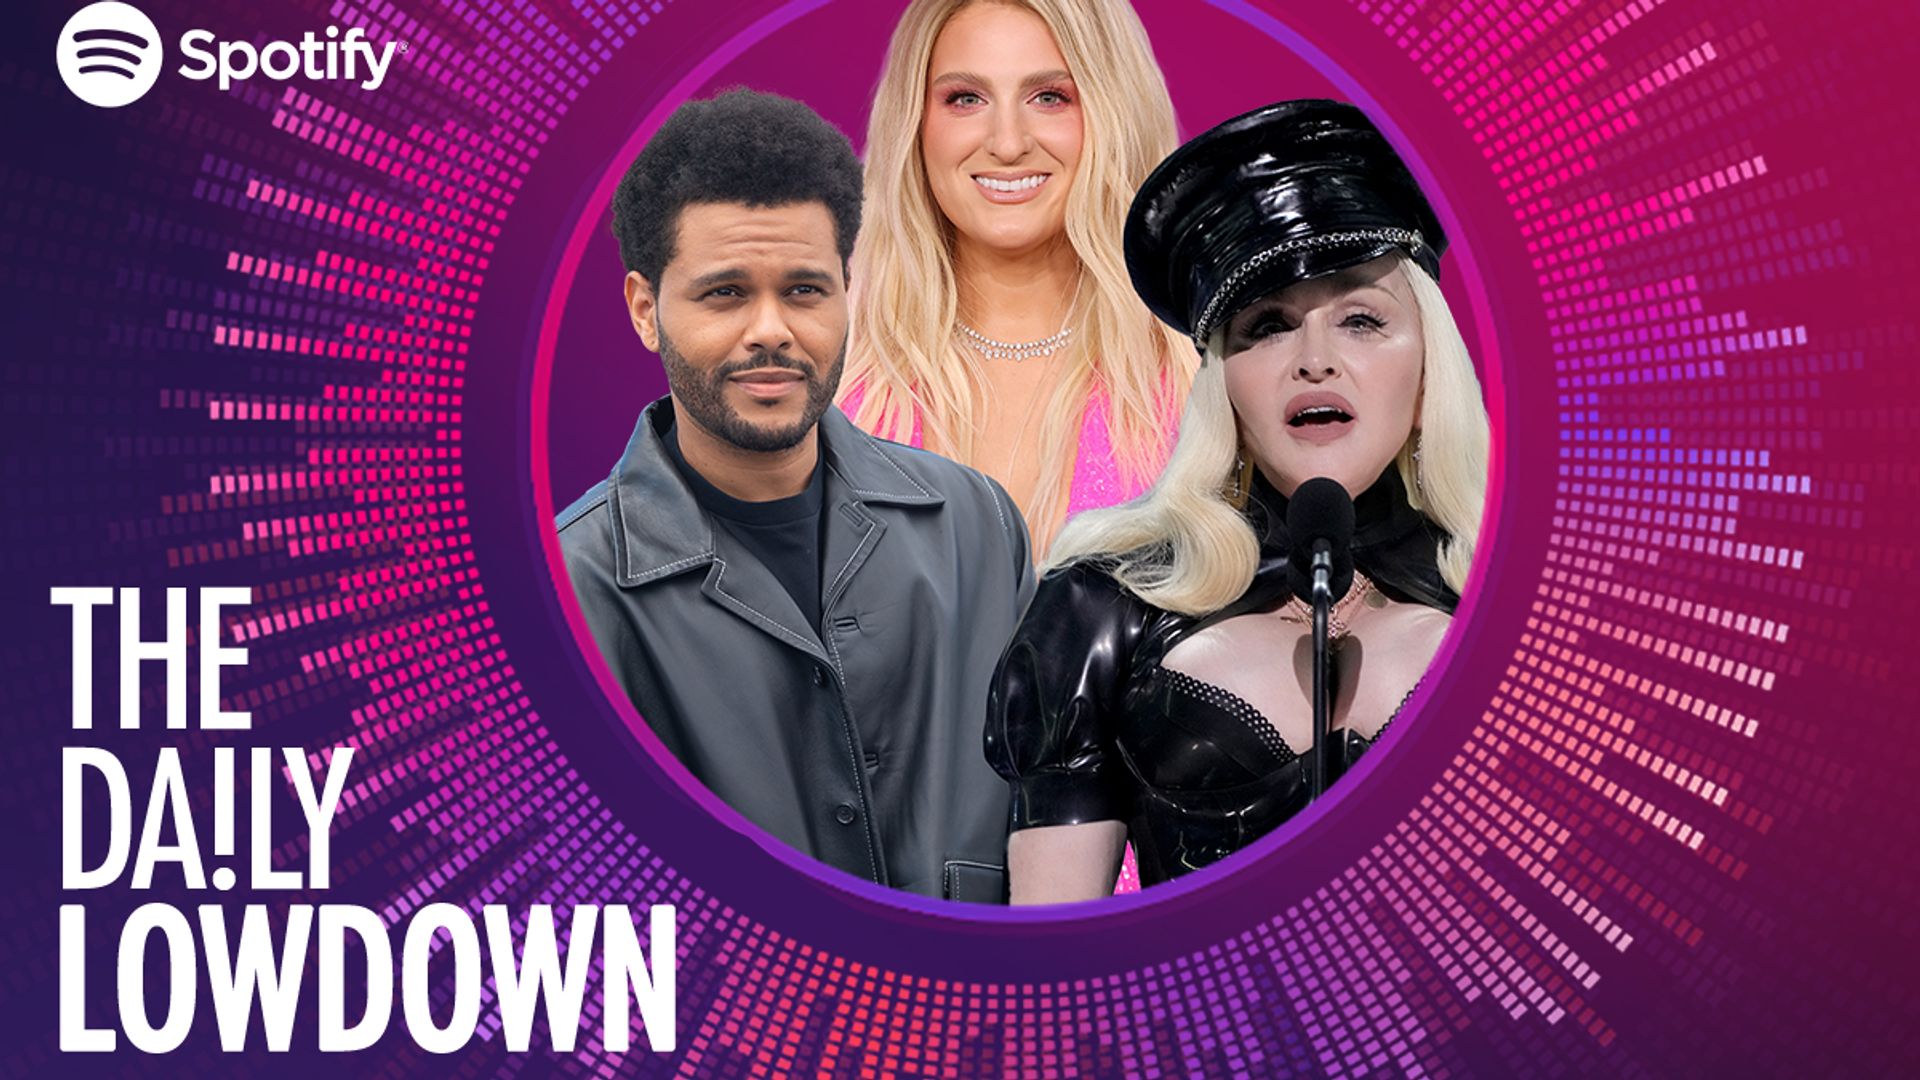 The Weeknd, Meghan Trainor and Madonna